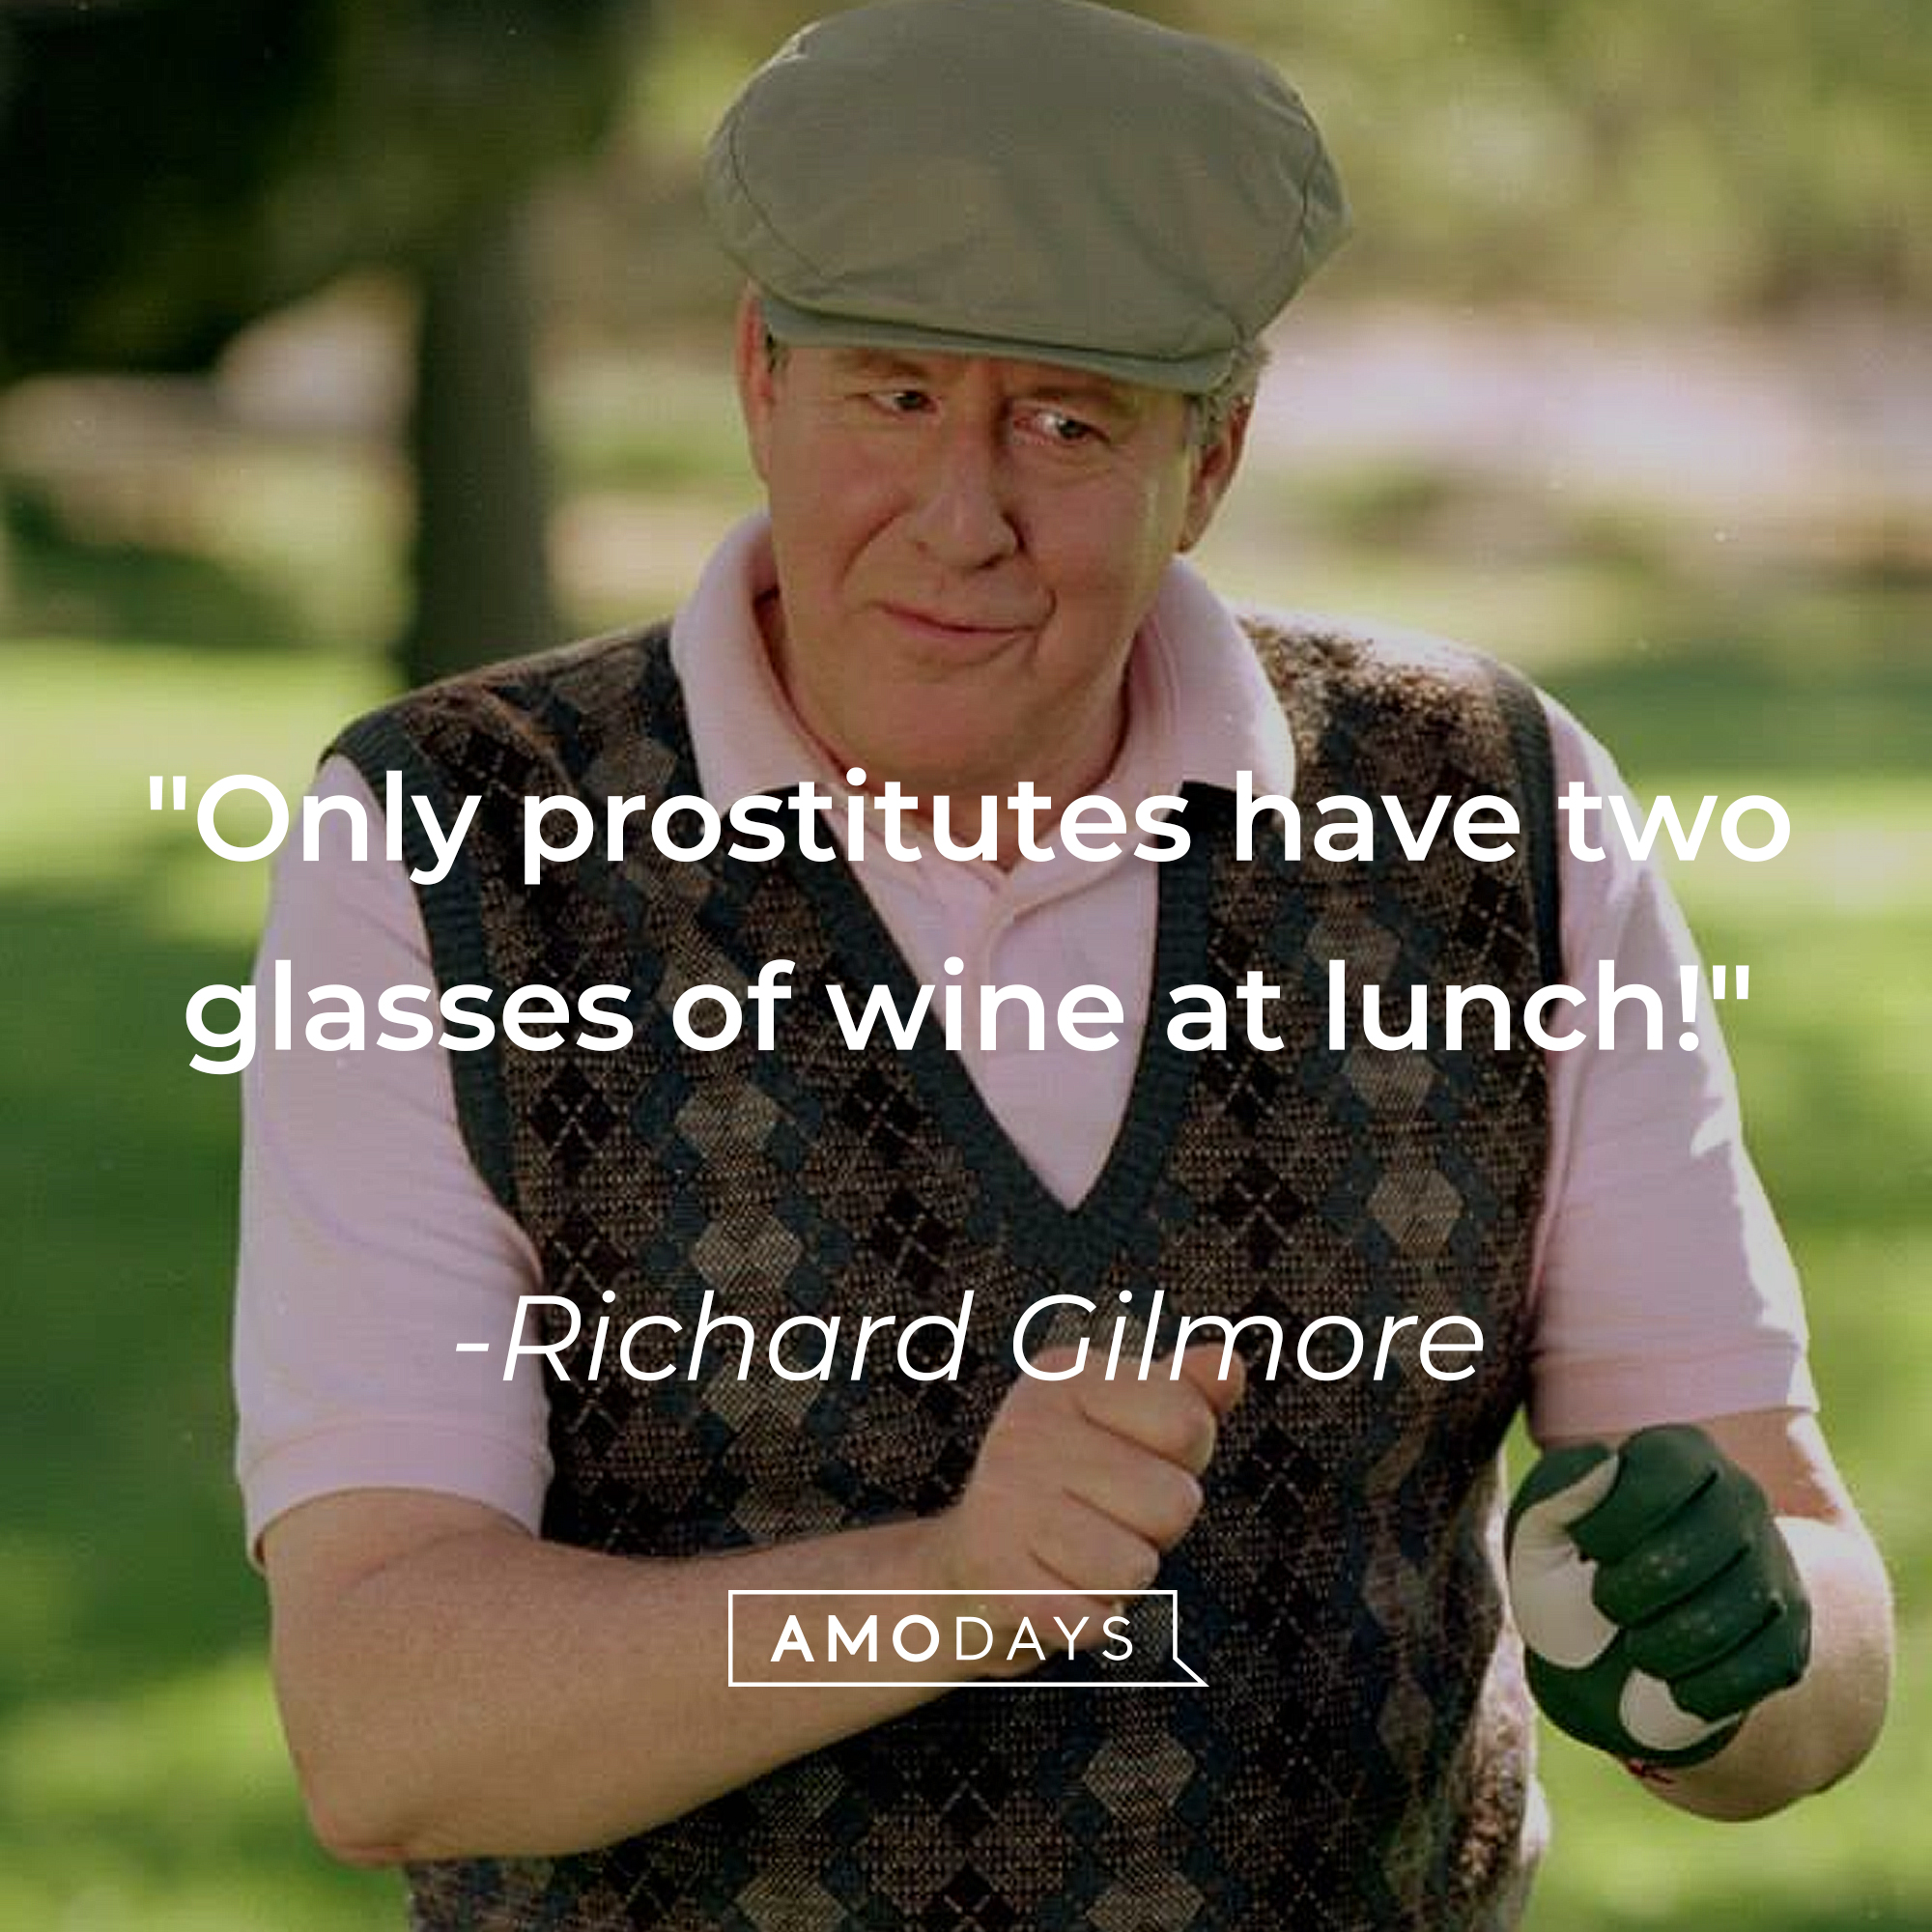 Richard Gilmore's quote: "Only prostitutes have two glasses of wine at lunch!" | Source: Facebook/GilmoreGirls